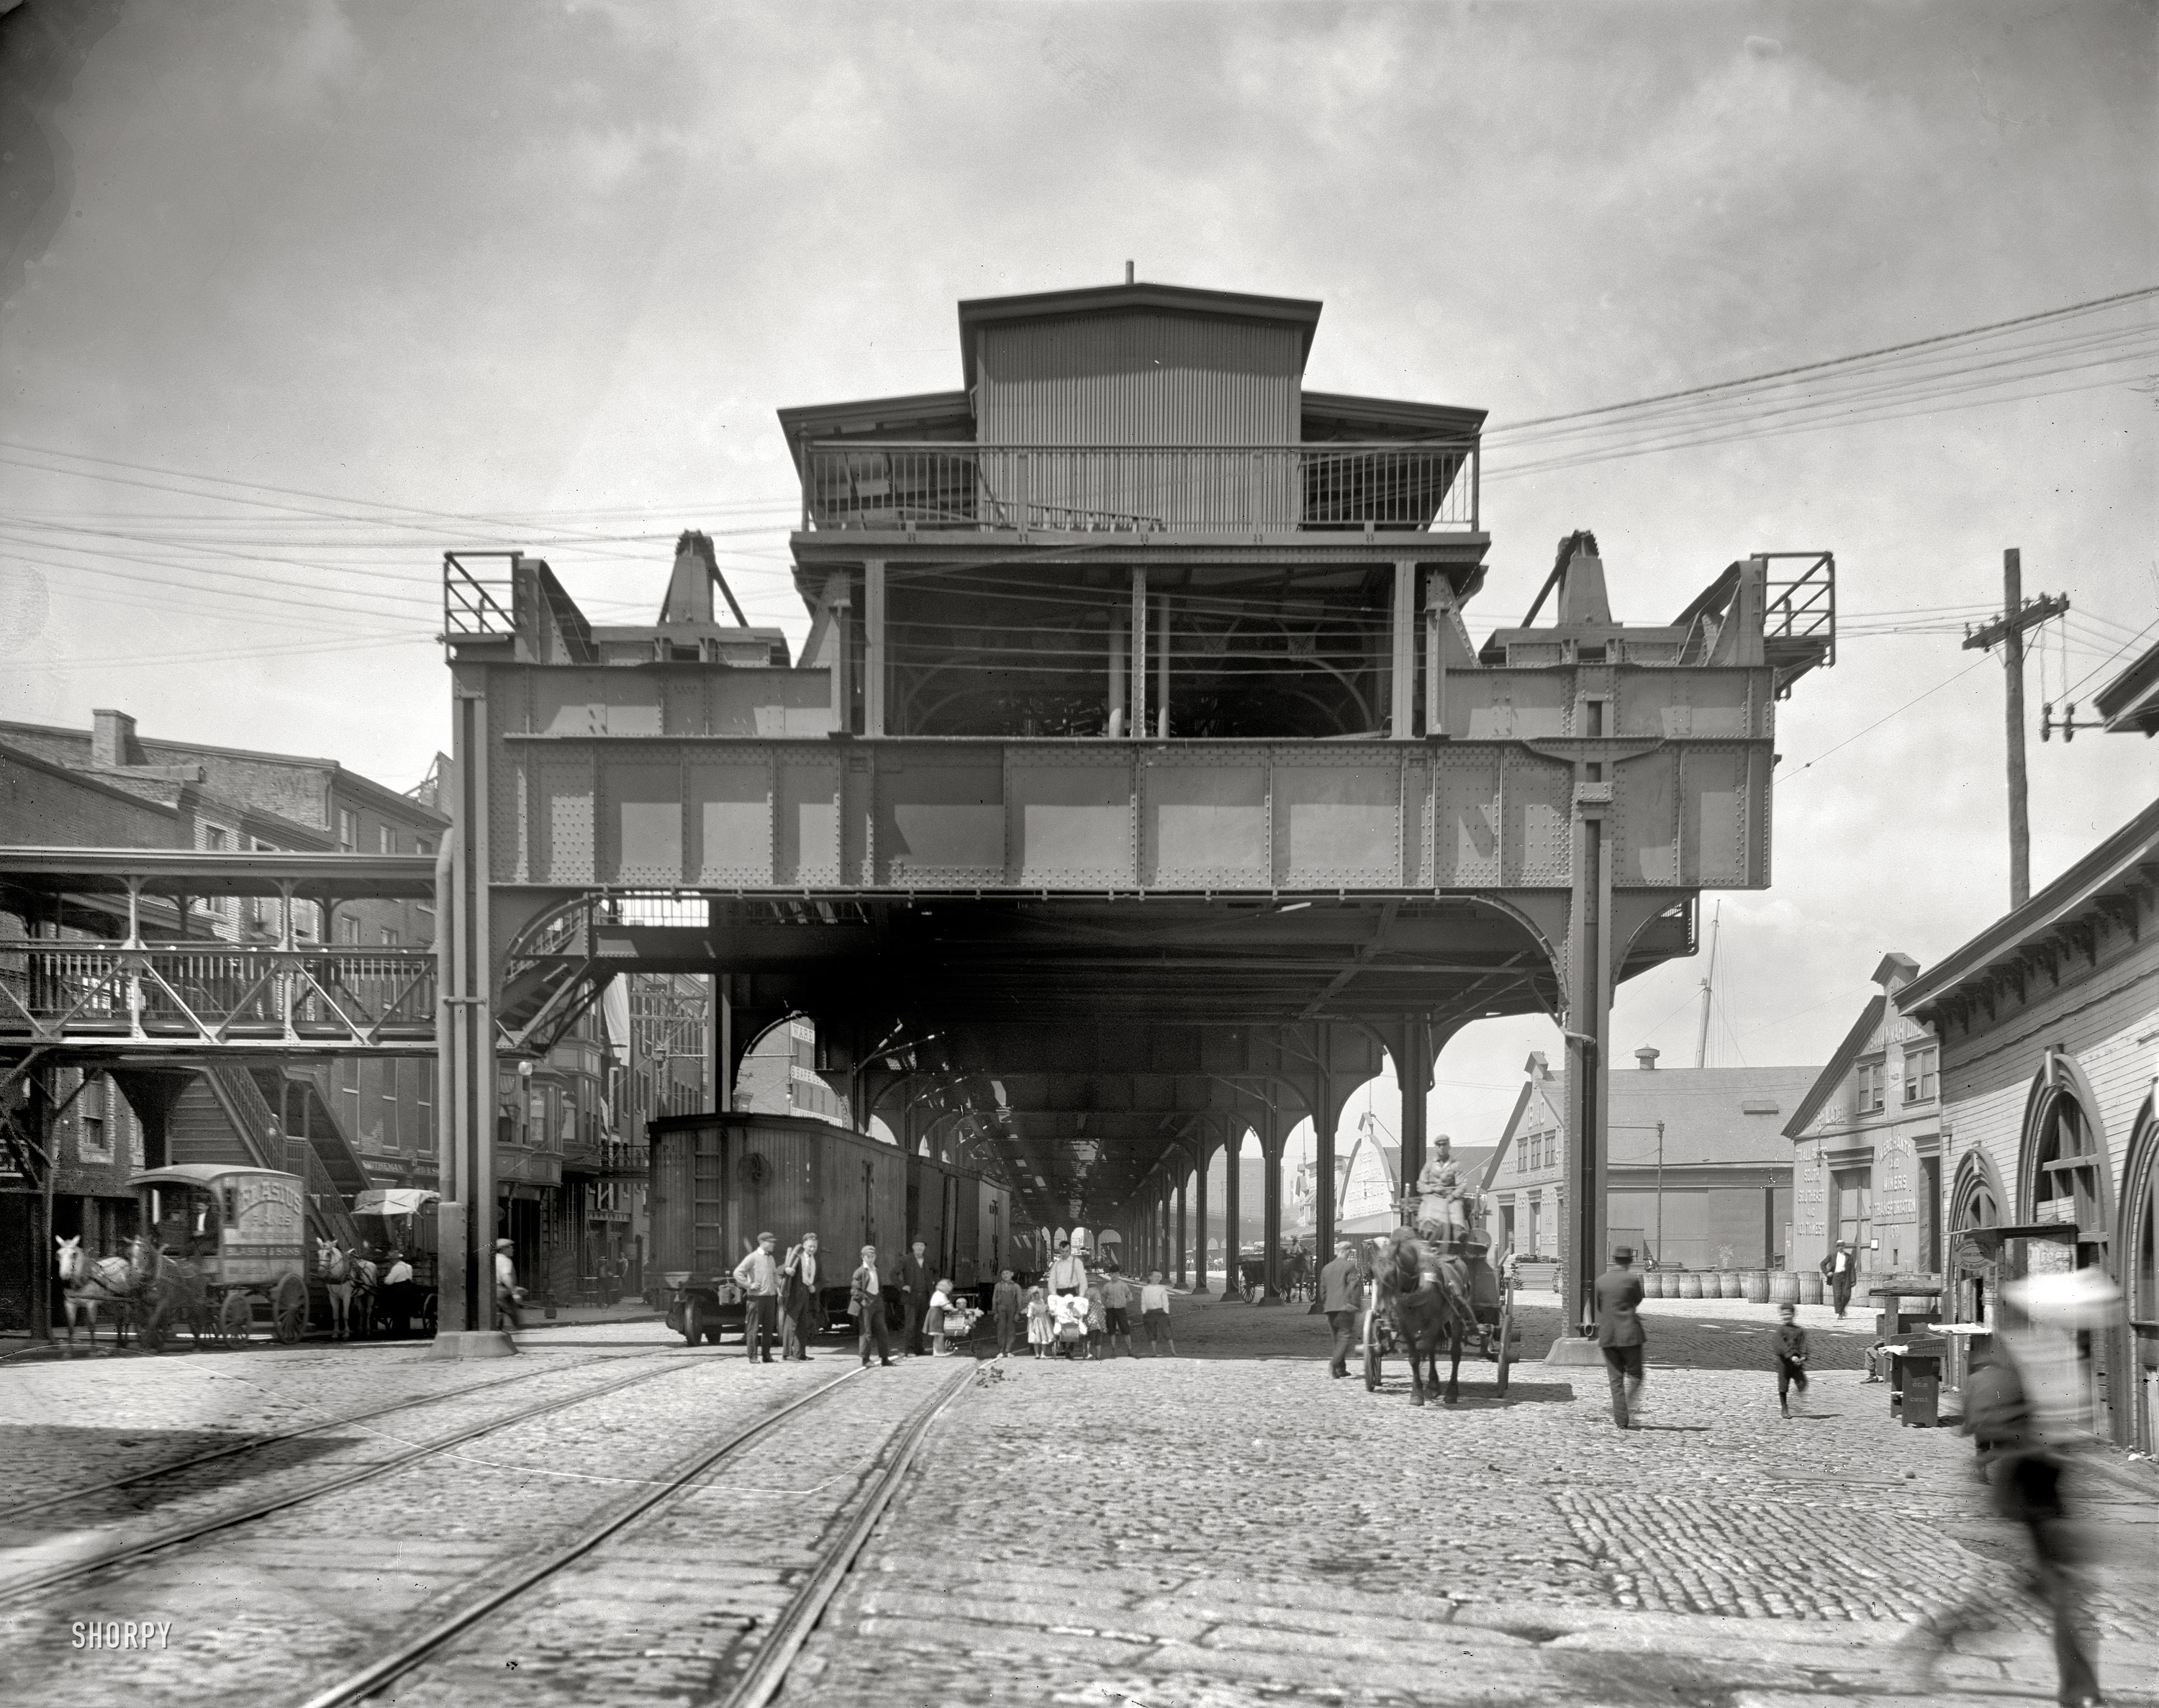 Philadelphia circa 1905. "The elevated railway at Delaware & South Streets." 8x10 inch dry plate glass negative, Detroit Publishing Company. View full size.